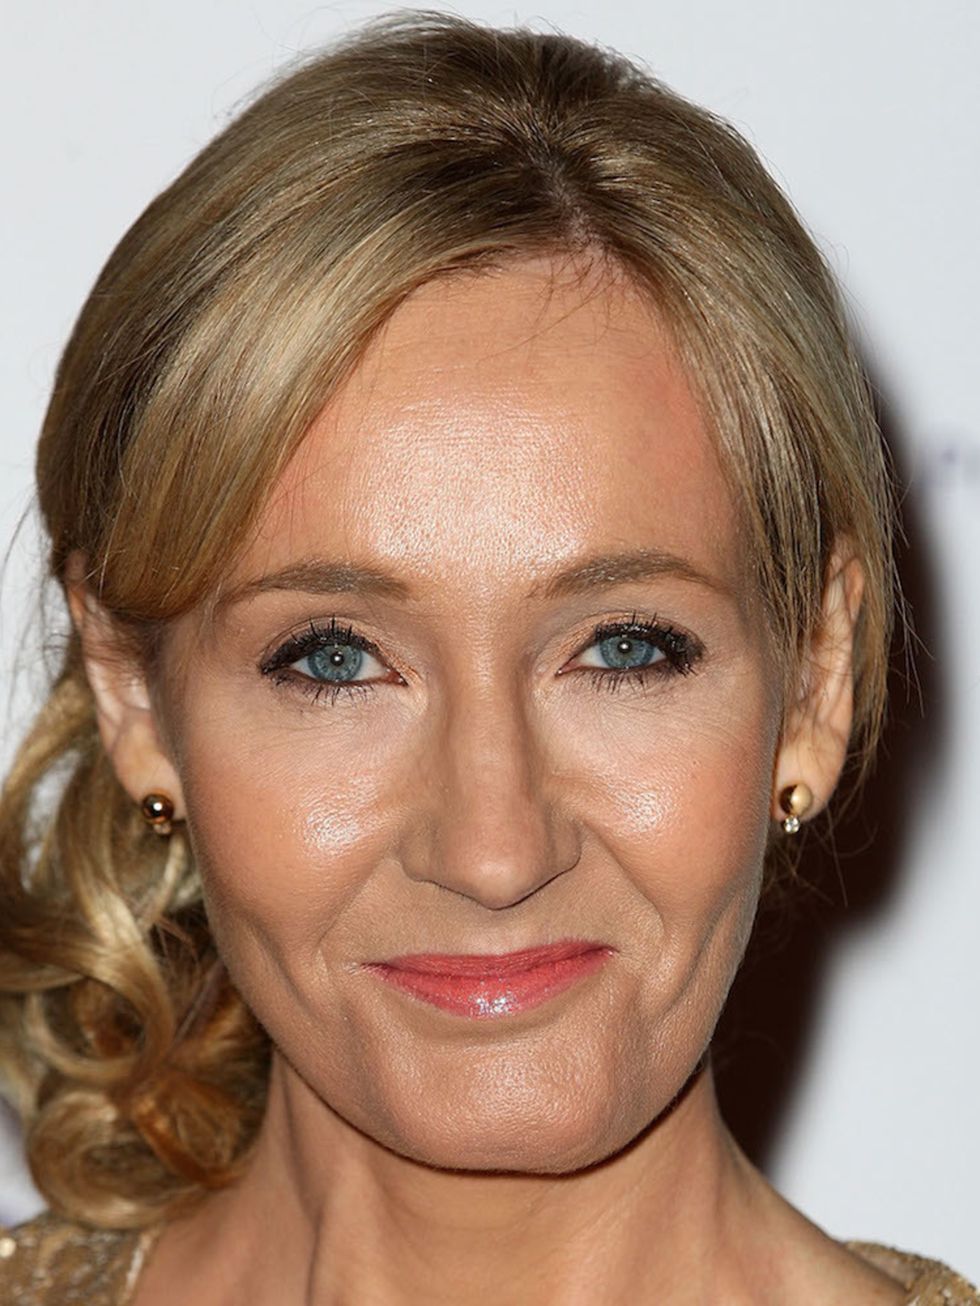 <p><strong>J.K. Rowling </strong></p>

<p><strong>Nominated for:</strong> Creating our favourite magical character, Harry Potter. Our world just wouldnt be the same without our beloved wizarding trio.</p>